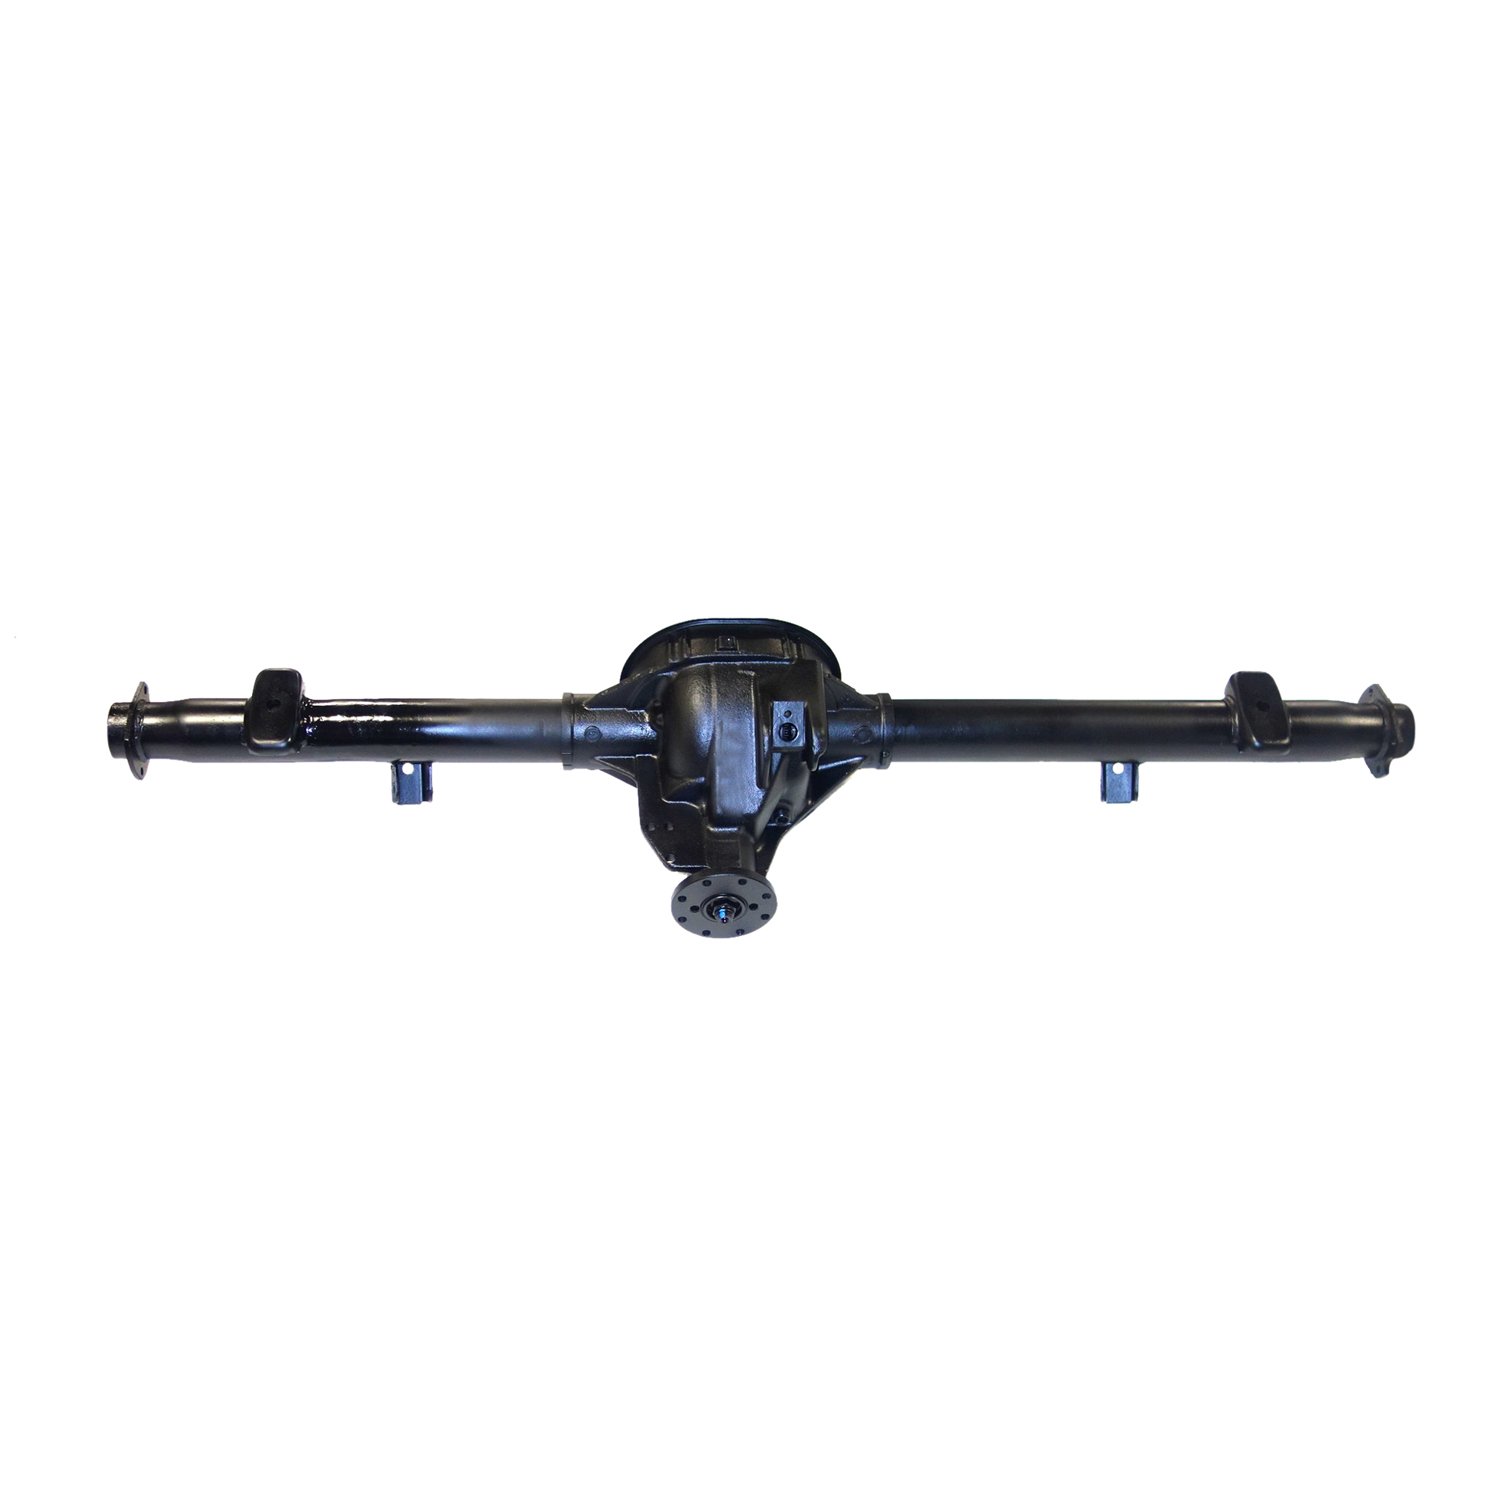 Remanufactured Axle Assy for 8.8" 2000 F150 3.31, Rear Disc, Posi LSD *Check Tag*